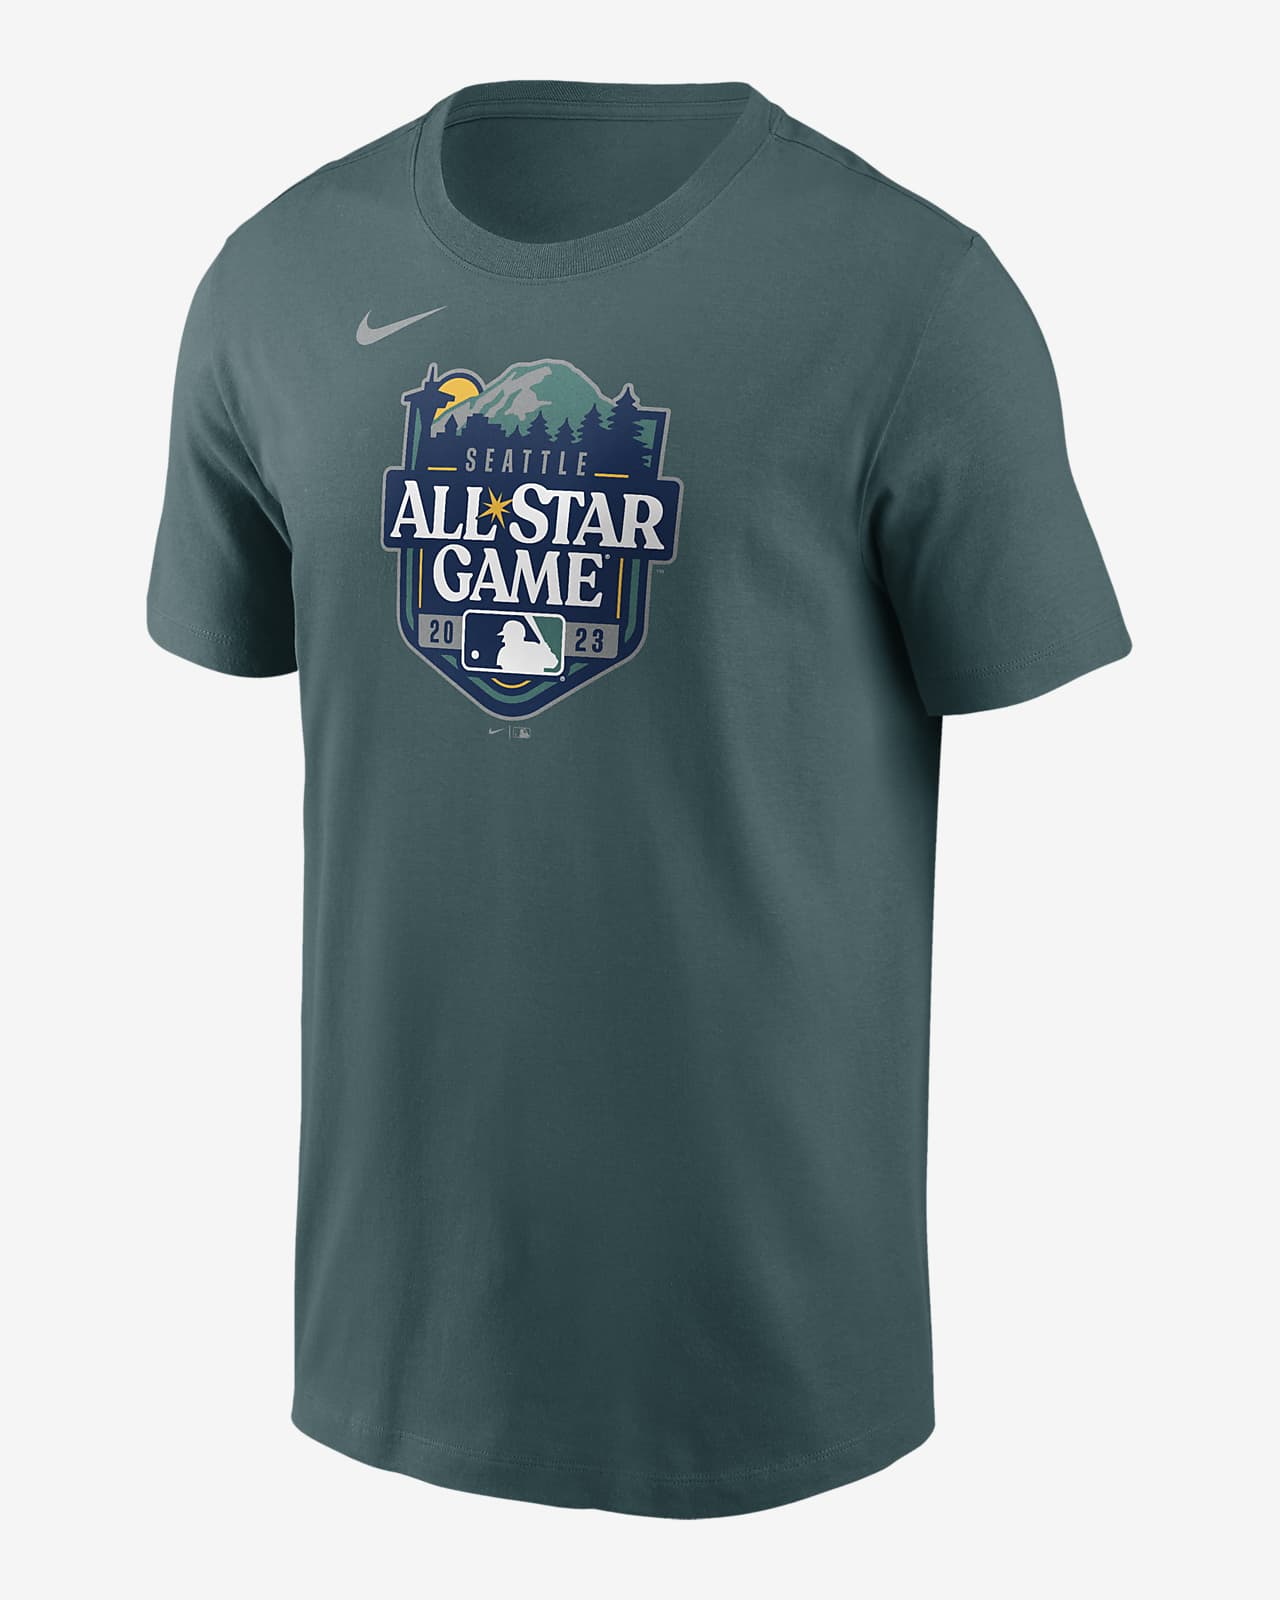 You all getting the 2022 MLB ASG gear, even though its the same as